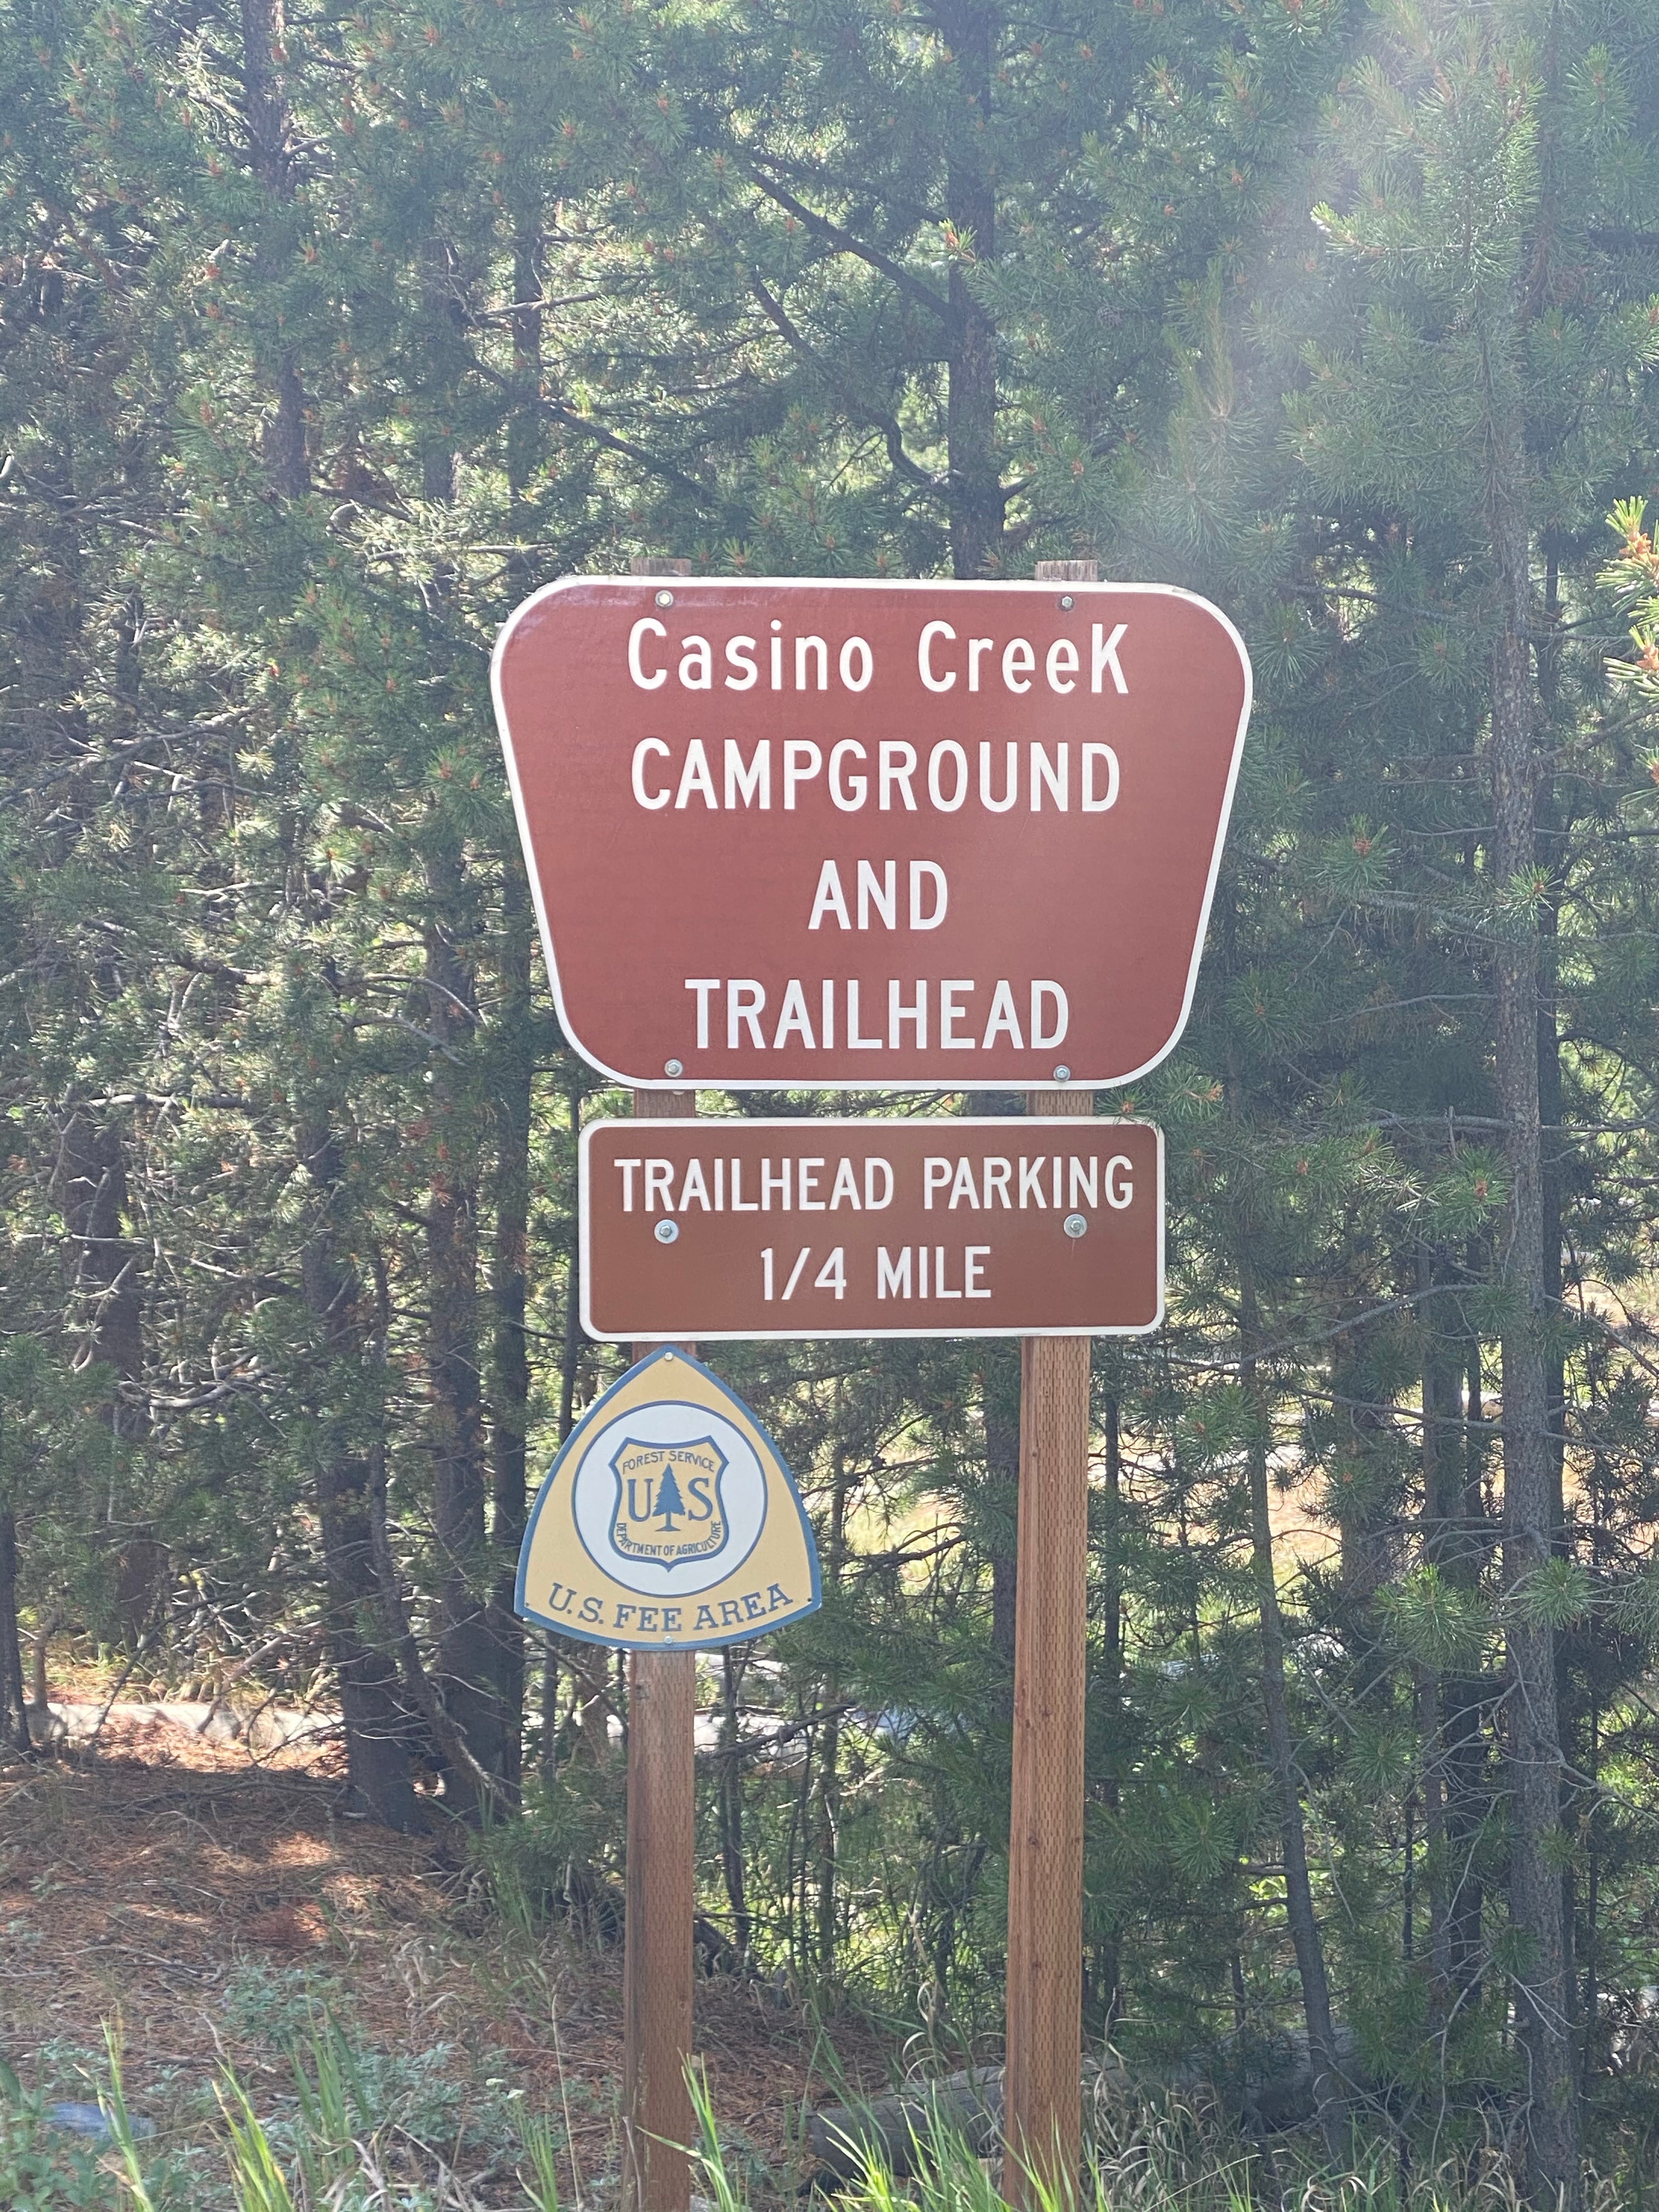 Camper submitted image from Casino Creek Campground - 1